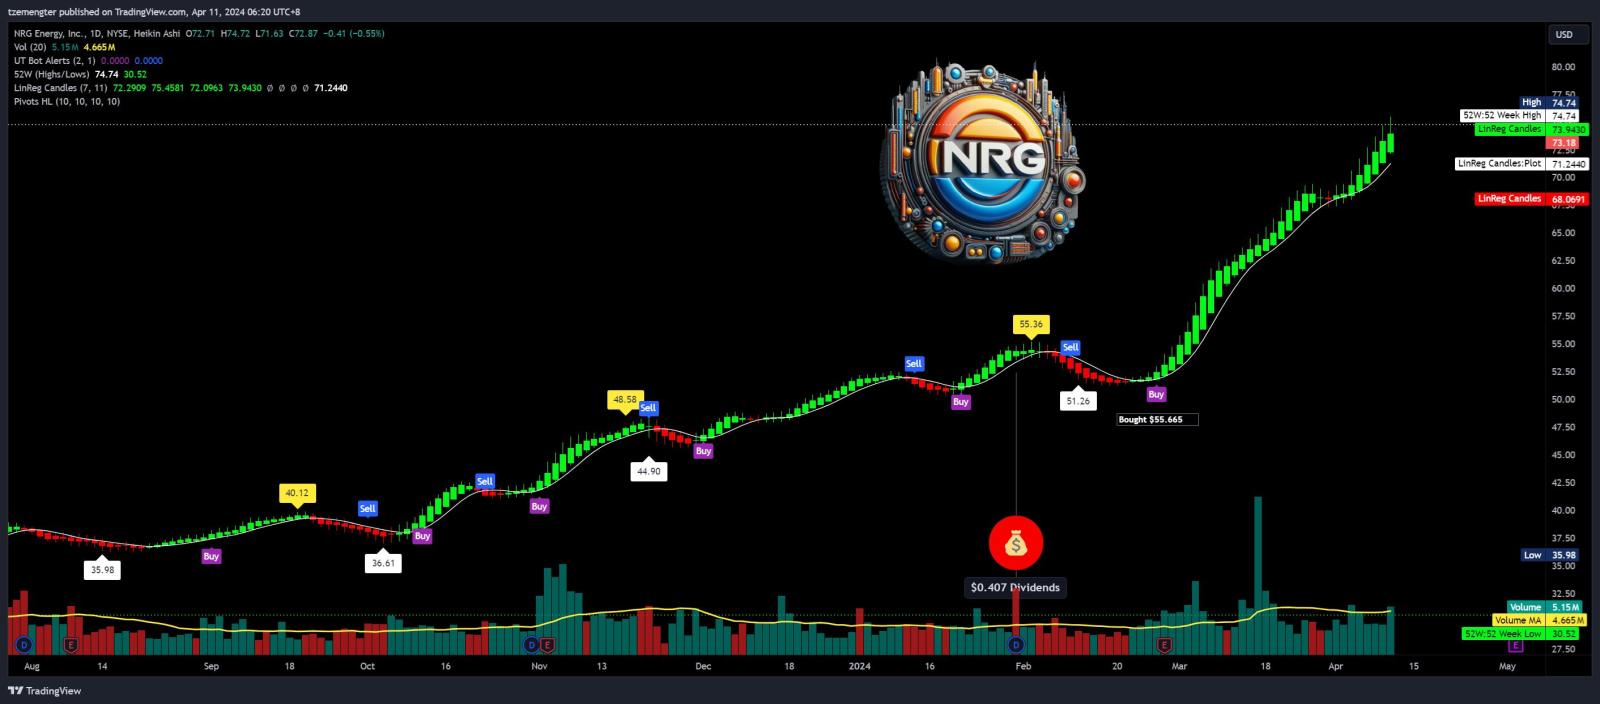 $NRG Energy (NRG.US)$ all time high again, strong uptrend.